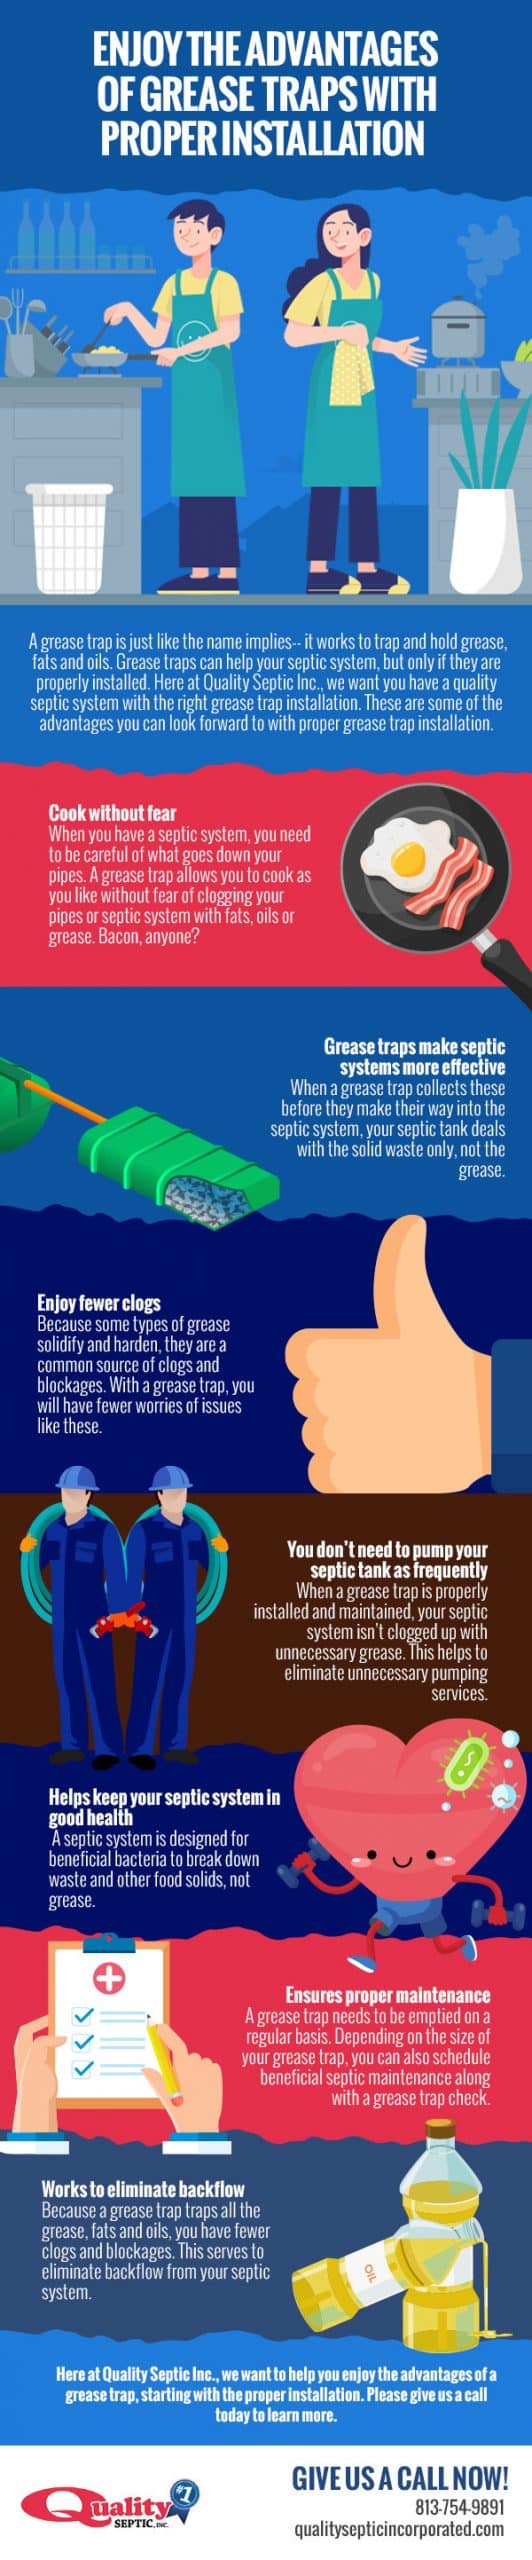 Enjoy the Advantages of Grease Traps with Proper Installation [infographic]